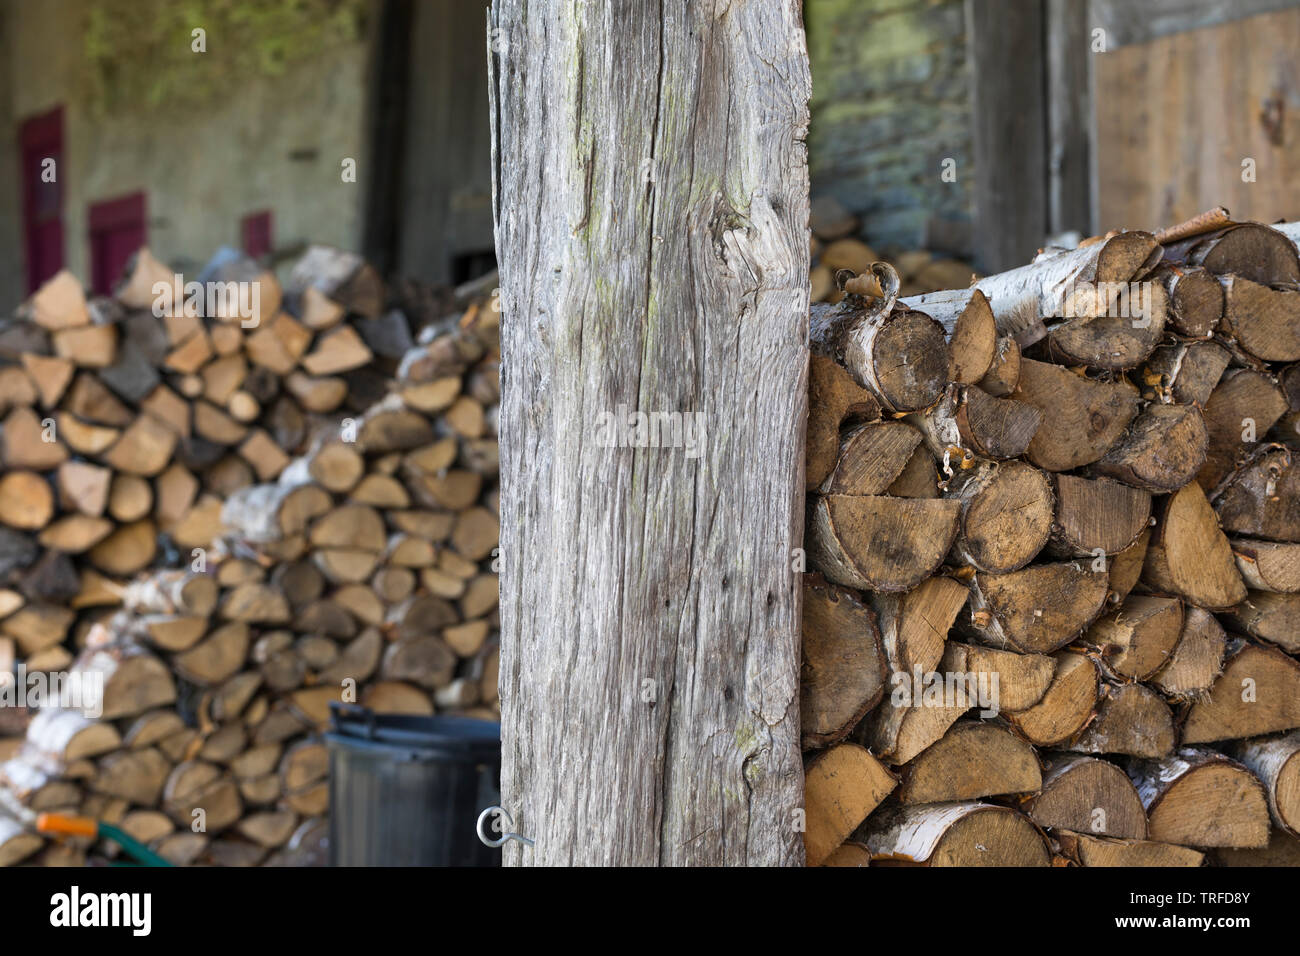 Pile with logs of firewood ready for the winter time, Belgium Stock Photo